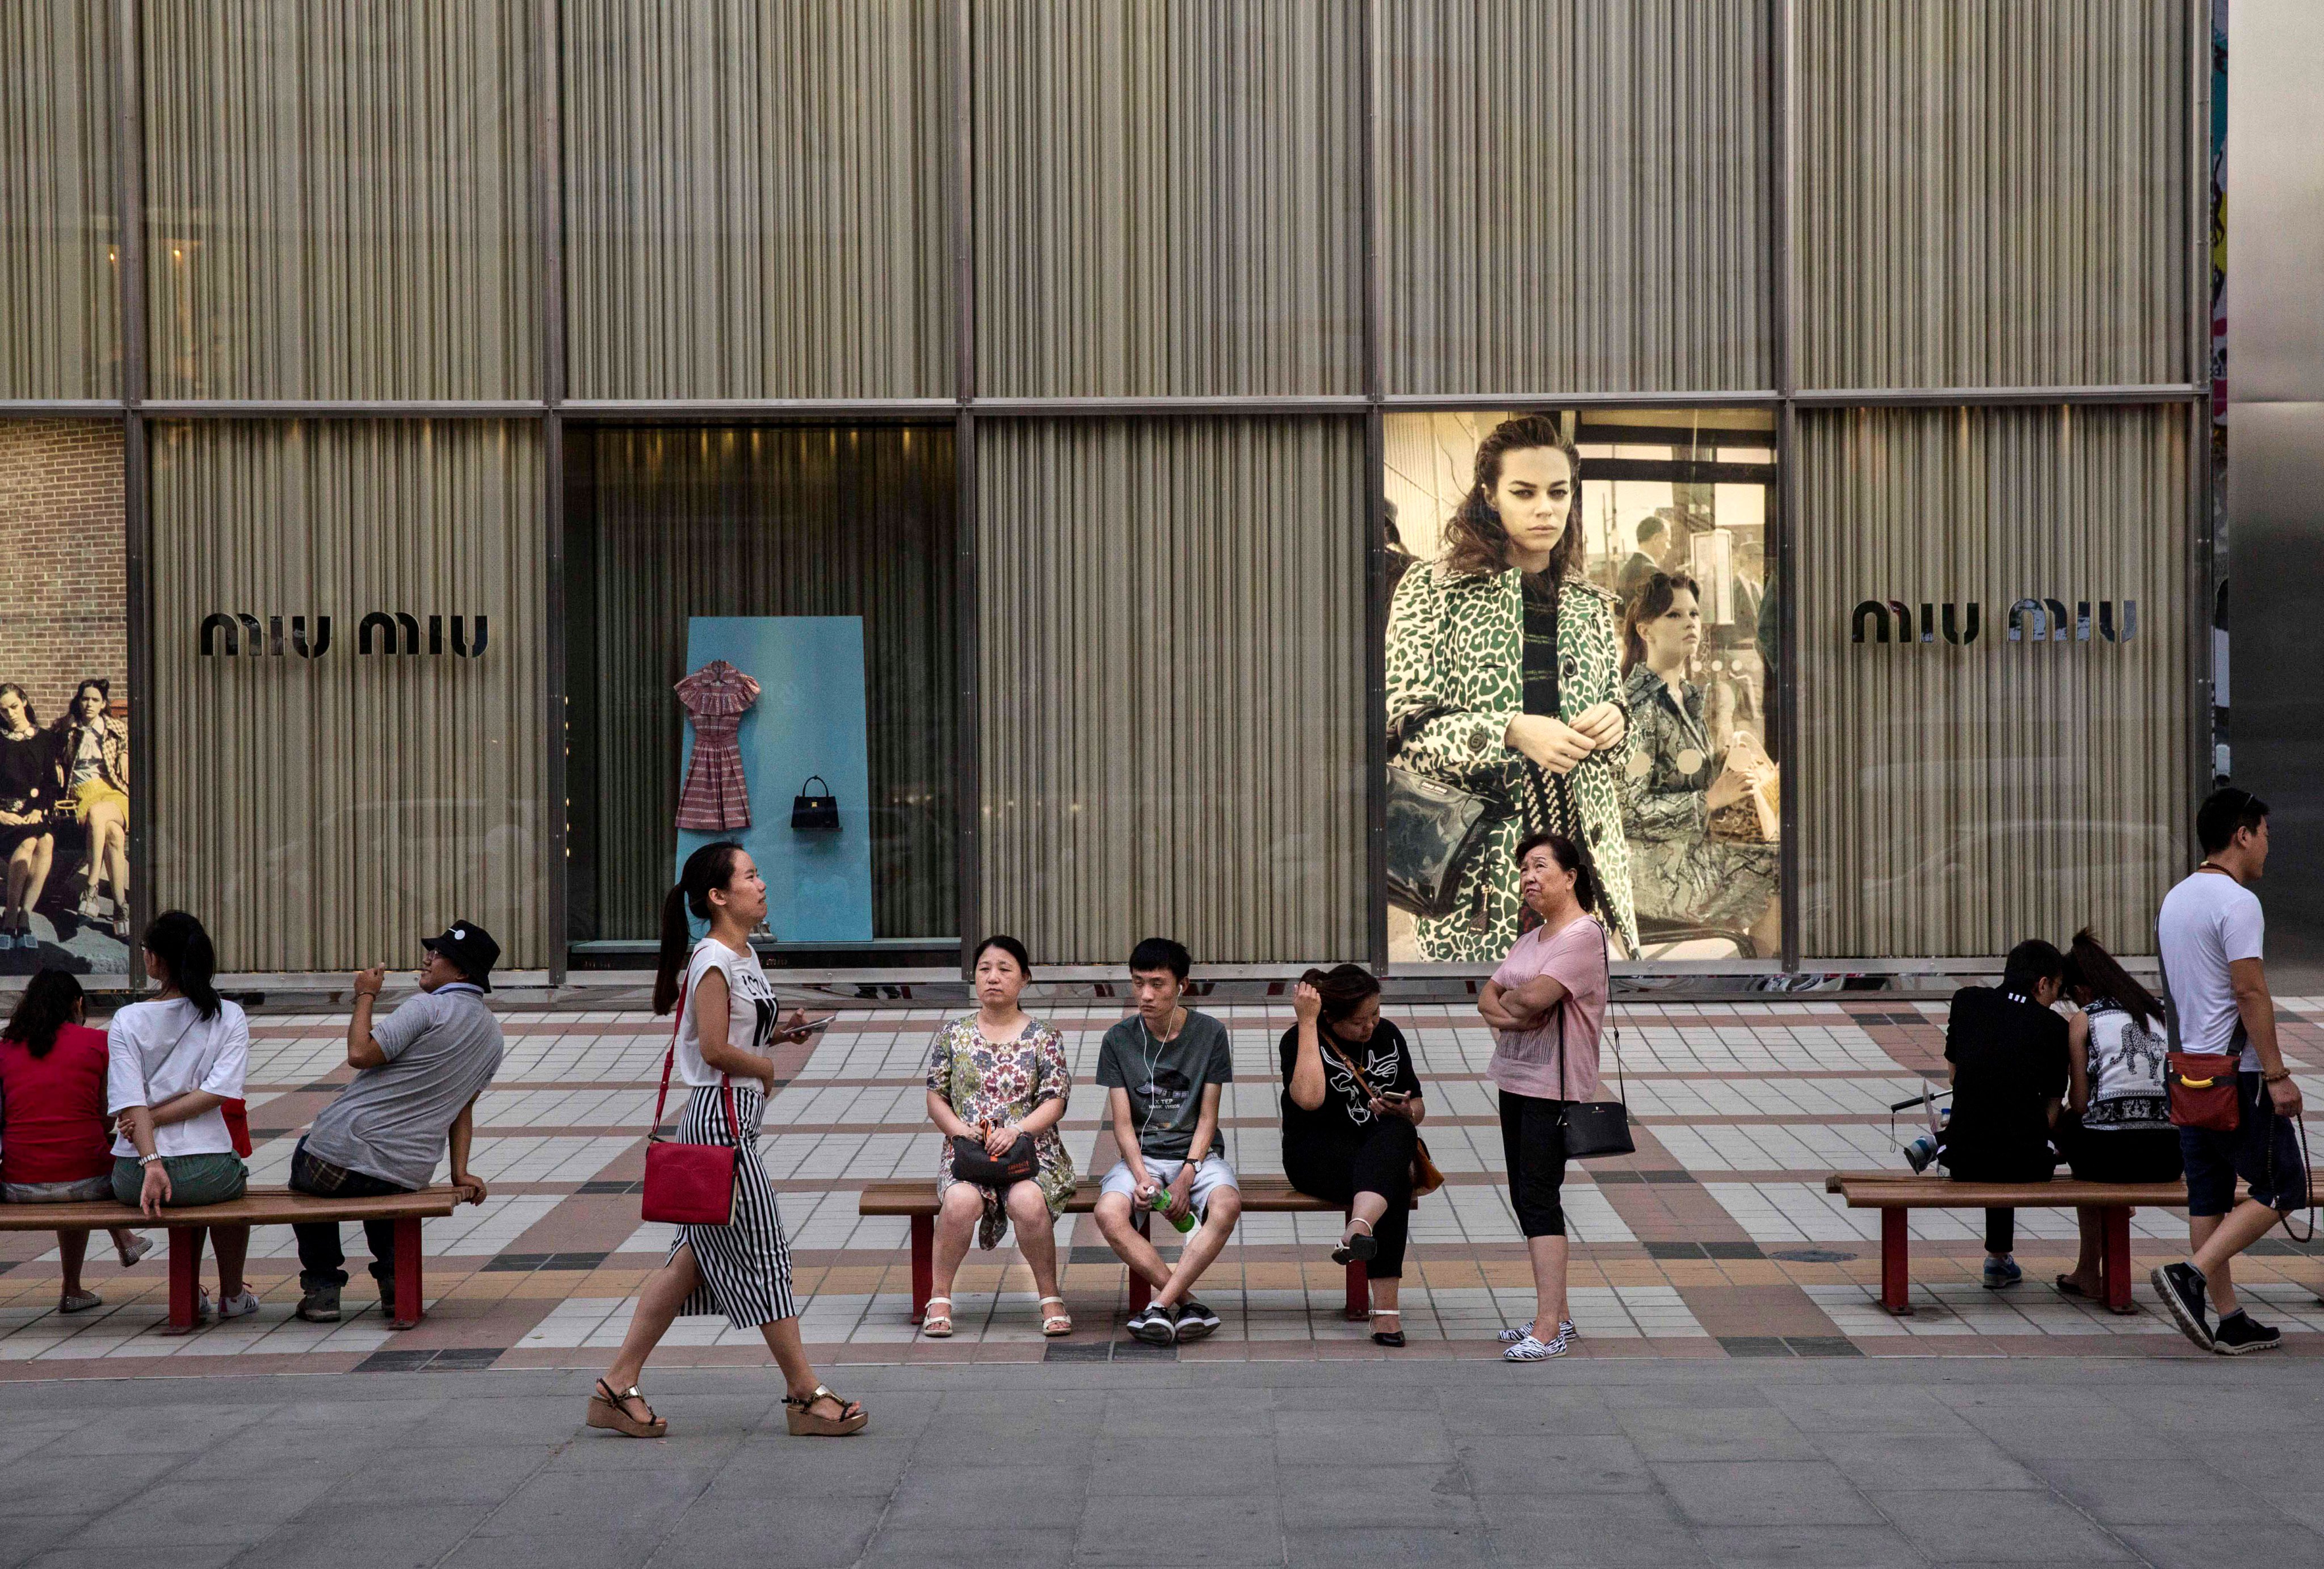 Shoppers sit in front of luxury store Miu Miu in an upscale shopping district in Beijing, China. Photo: Getty Images